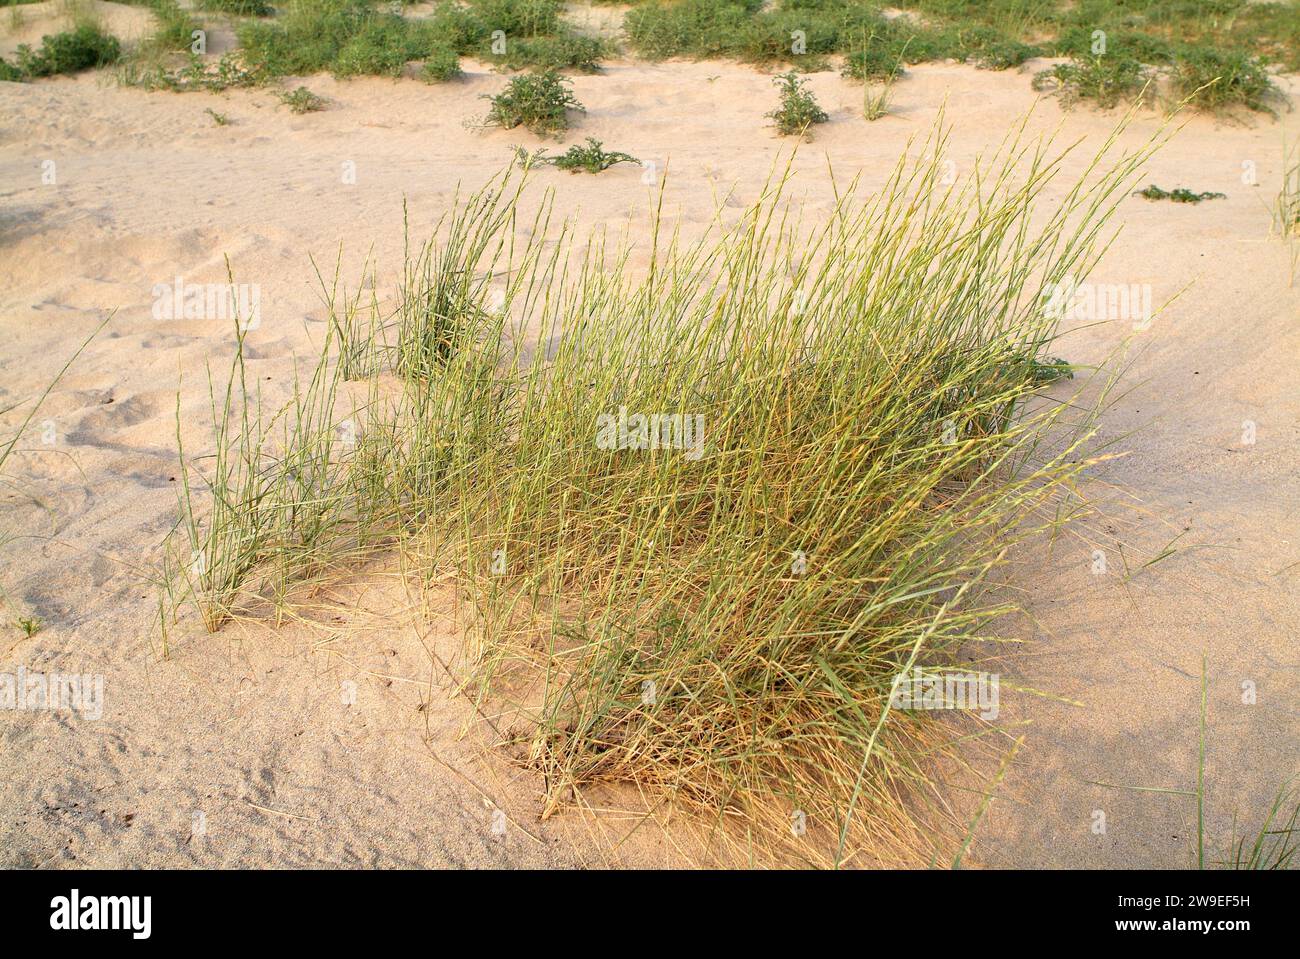 Sand couch grass (Elymus farctus or Agropyron junceum) is a perennial herb native to coasts to Europe, north Africa and Asia. This photo was taken in Stock Photo